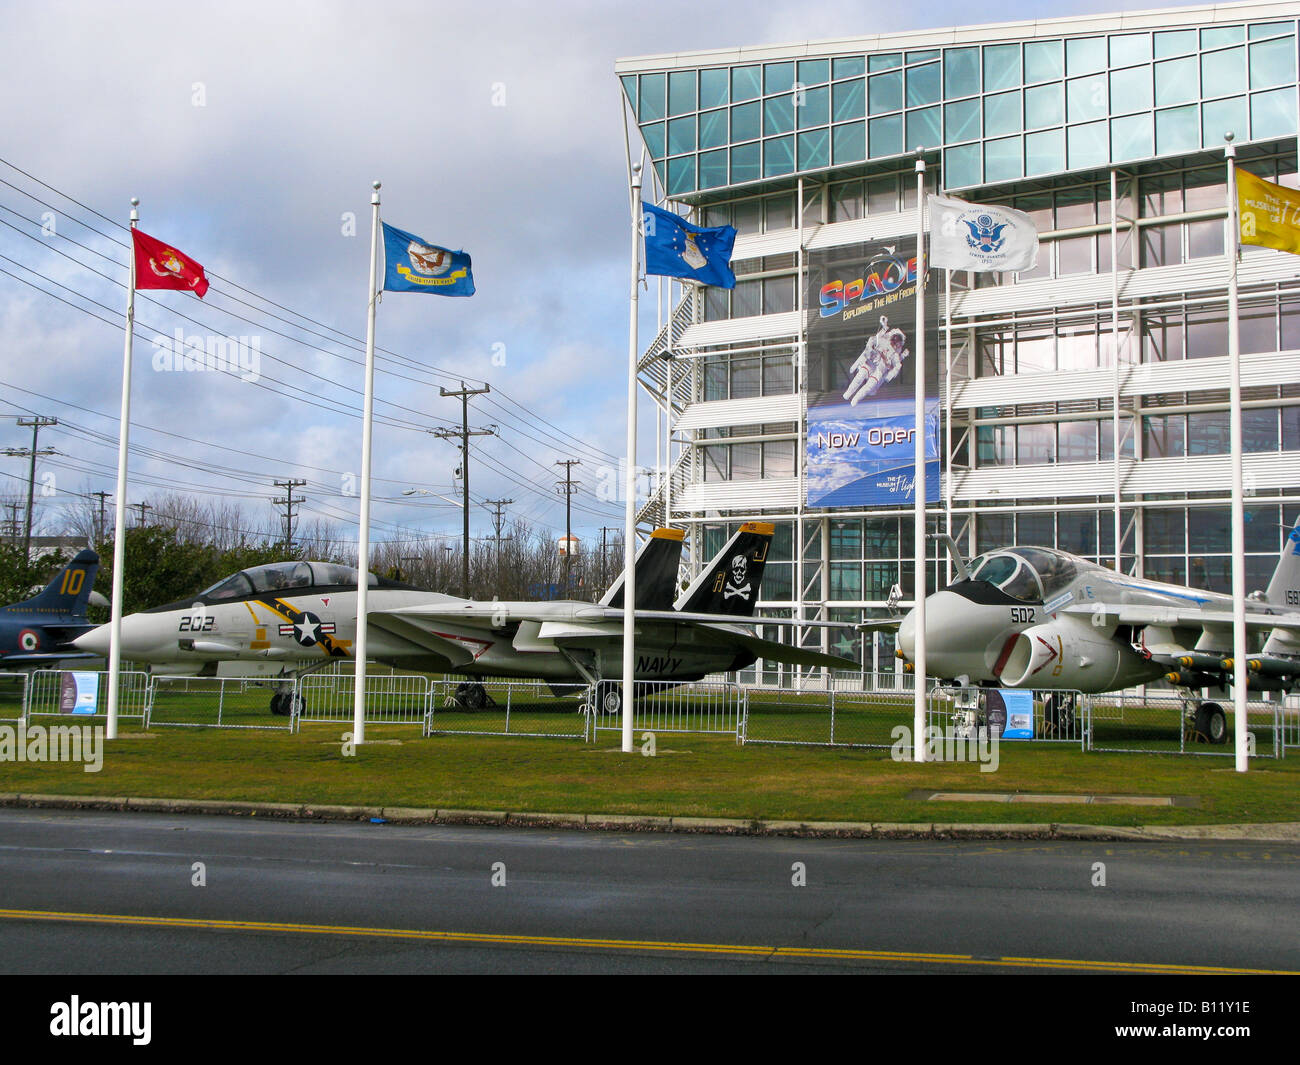 United States Air Force Fighter jets Boeing Museum of Flight Seattle Washington Stockfoto